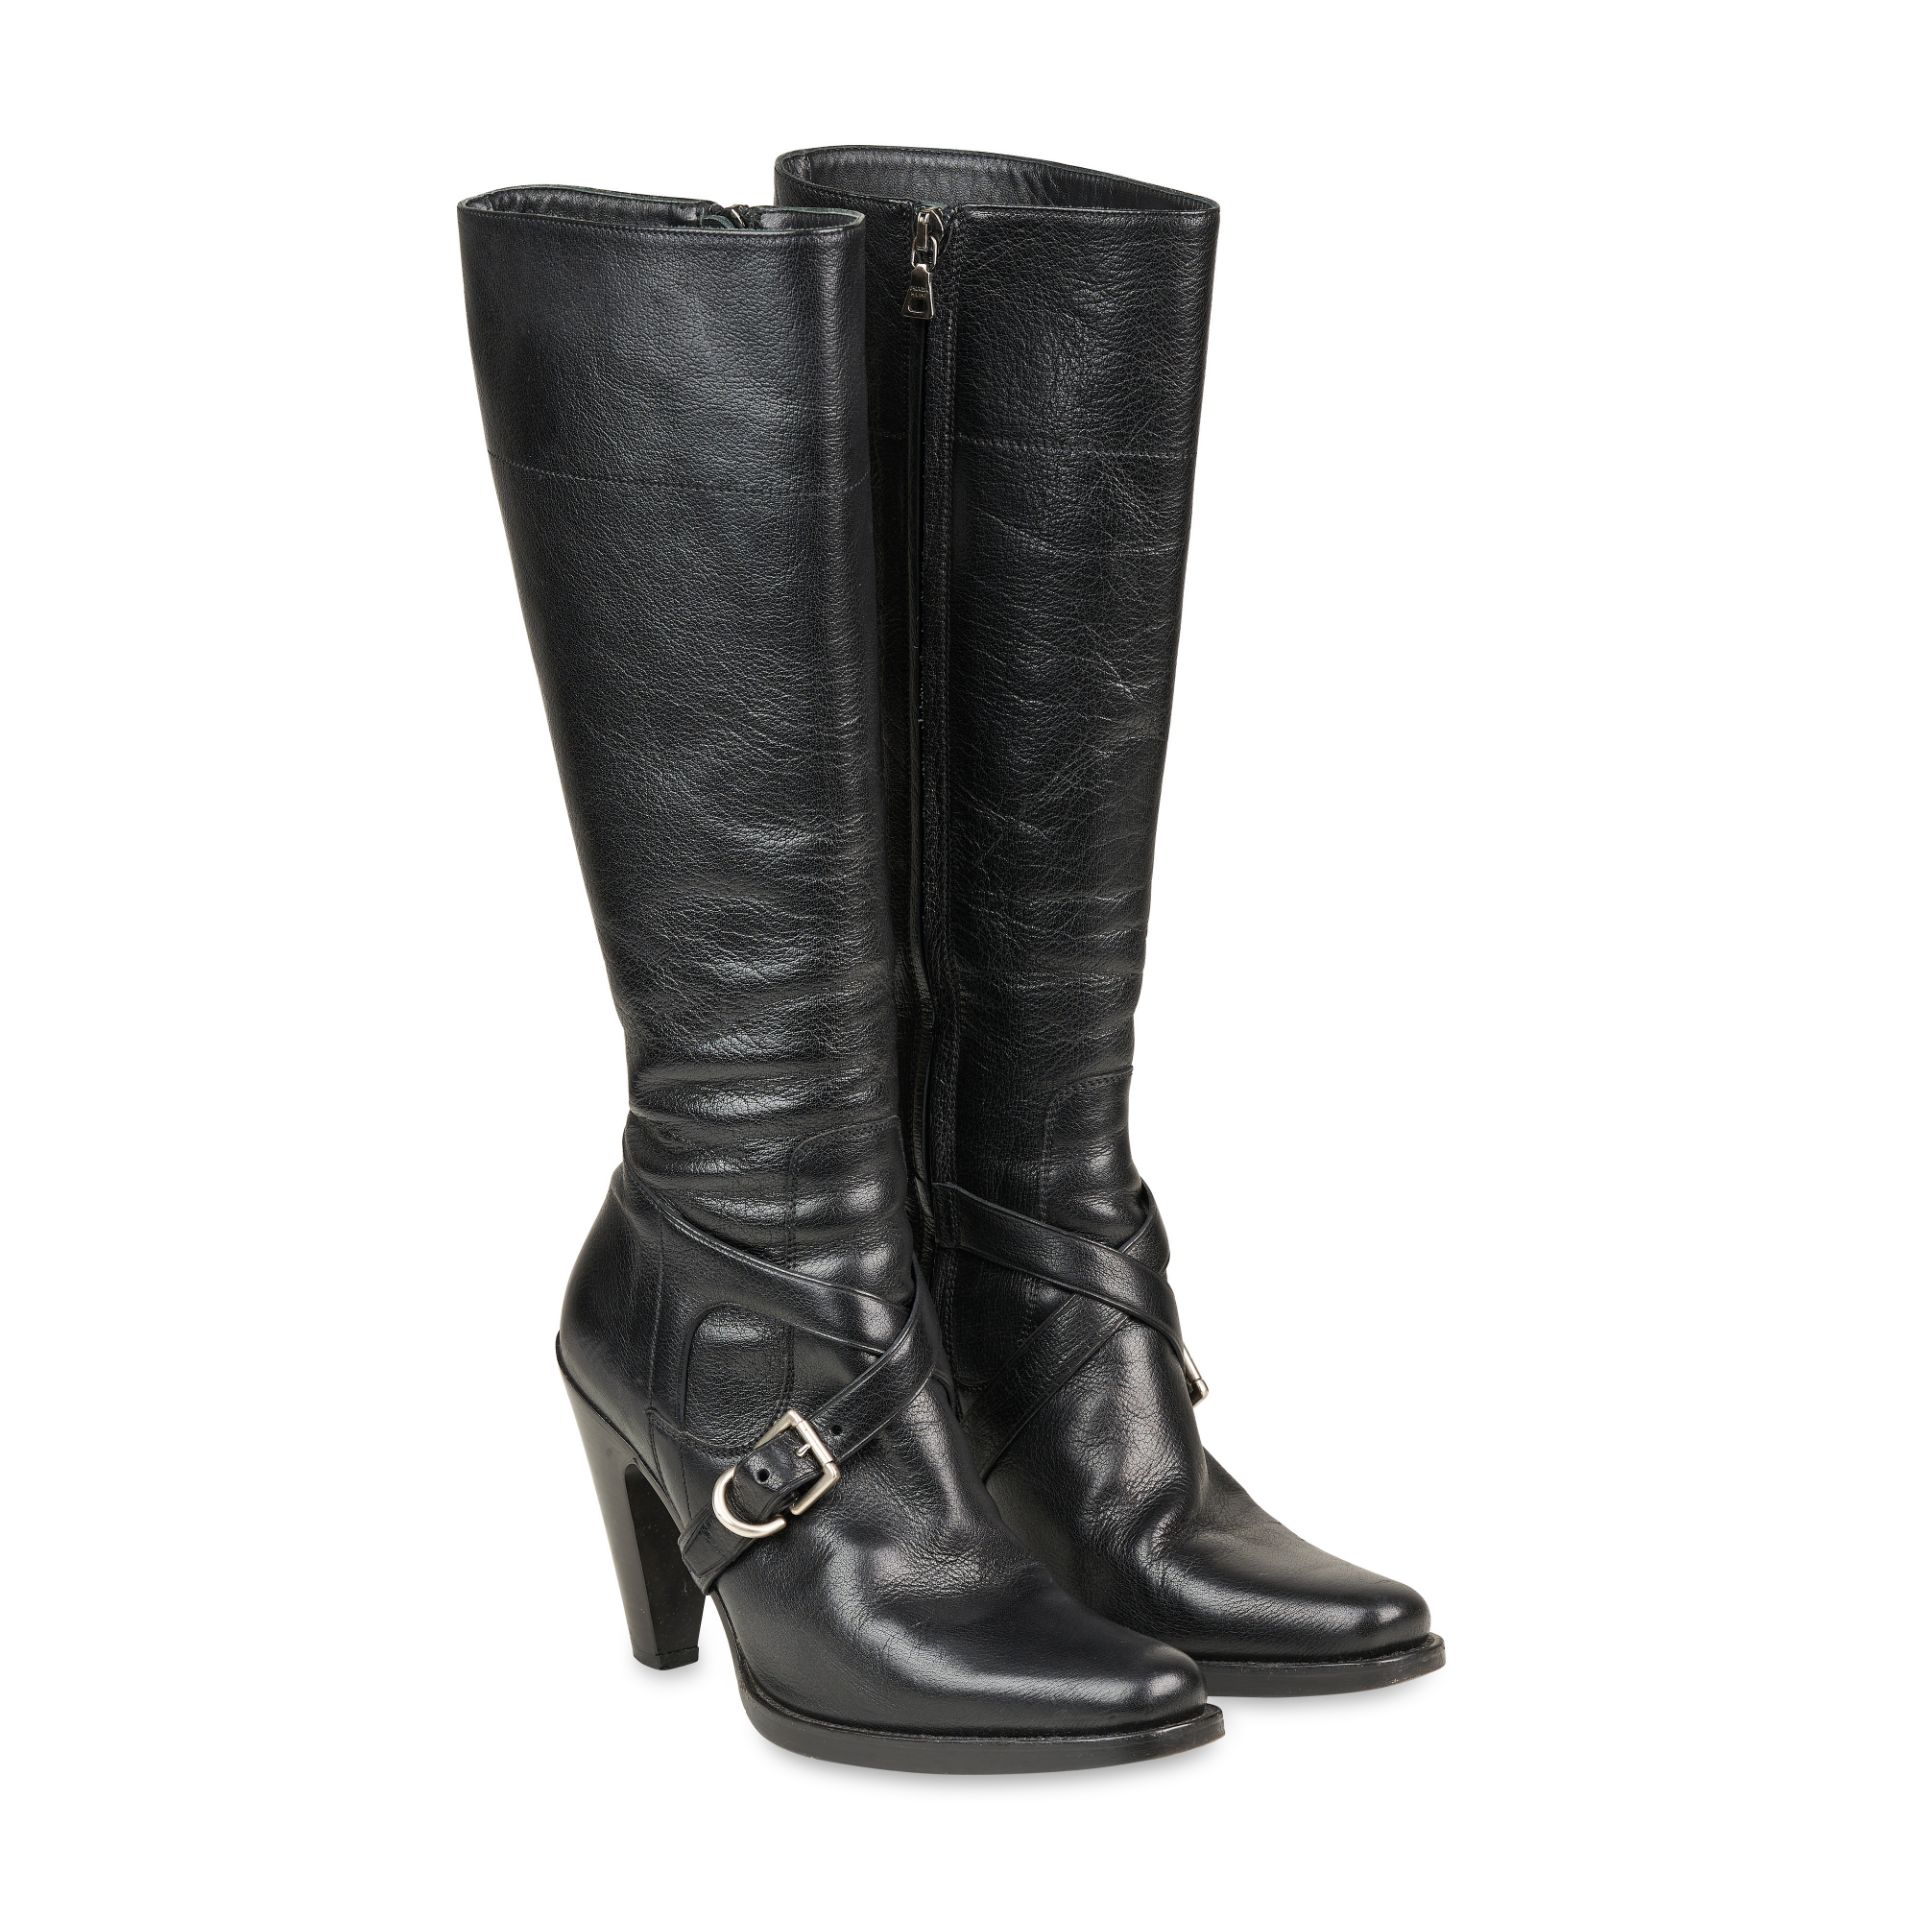 NO RESERVE PRADA KNEE HIGH LEATHER BOOTS